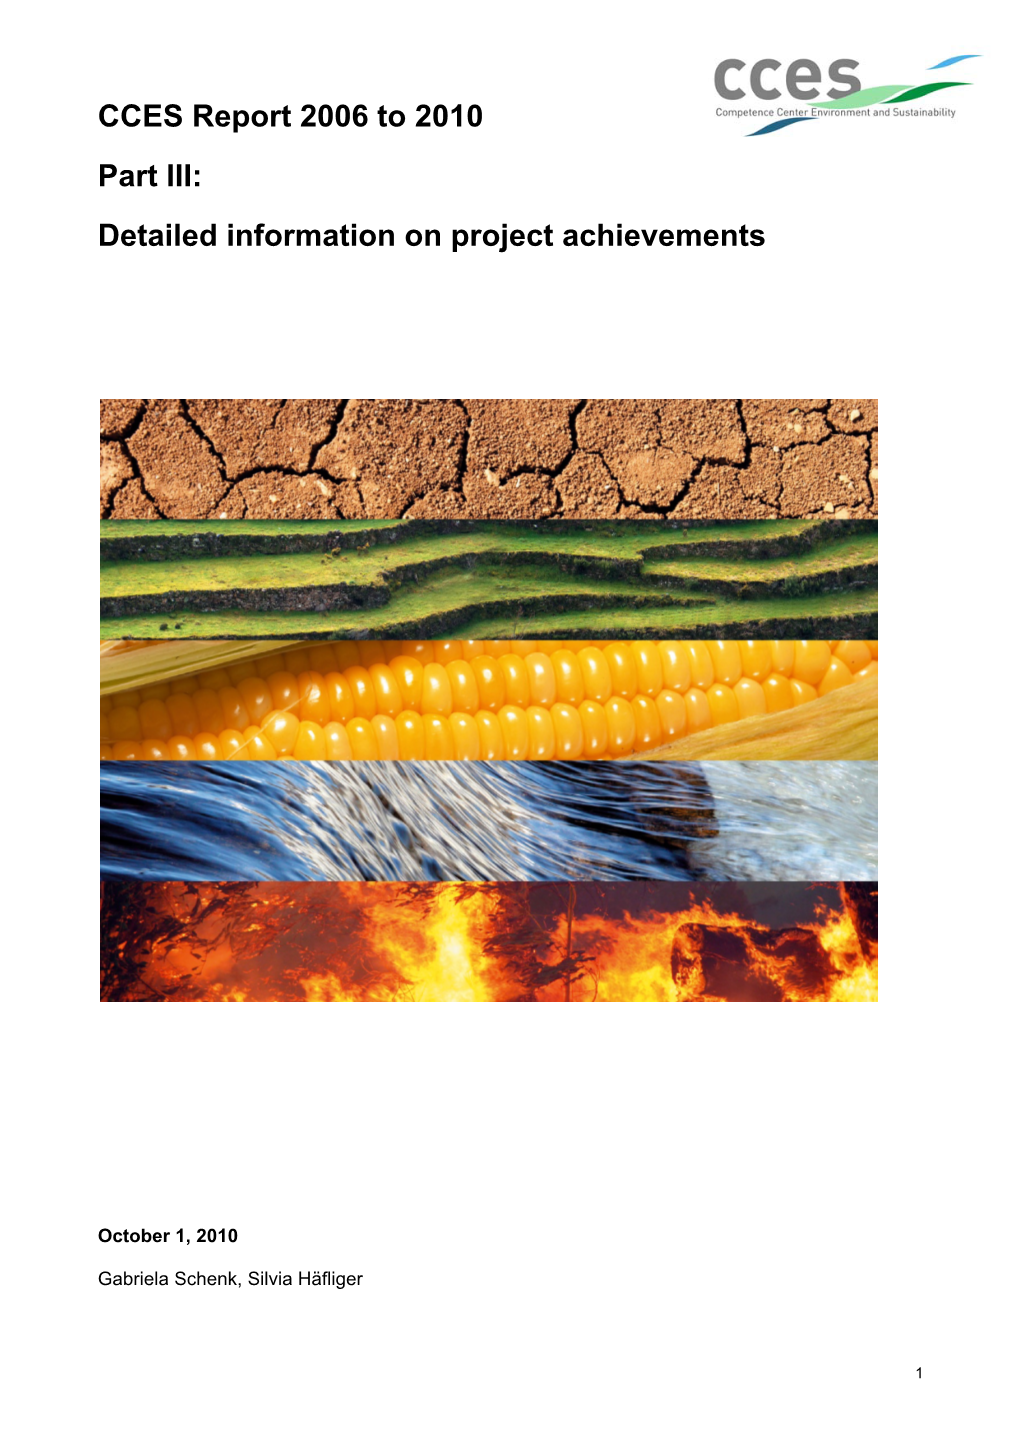 CCES Report 2006 to 2010 Part III: Detailed Information on Project Achievements